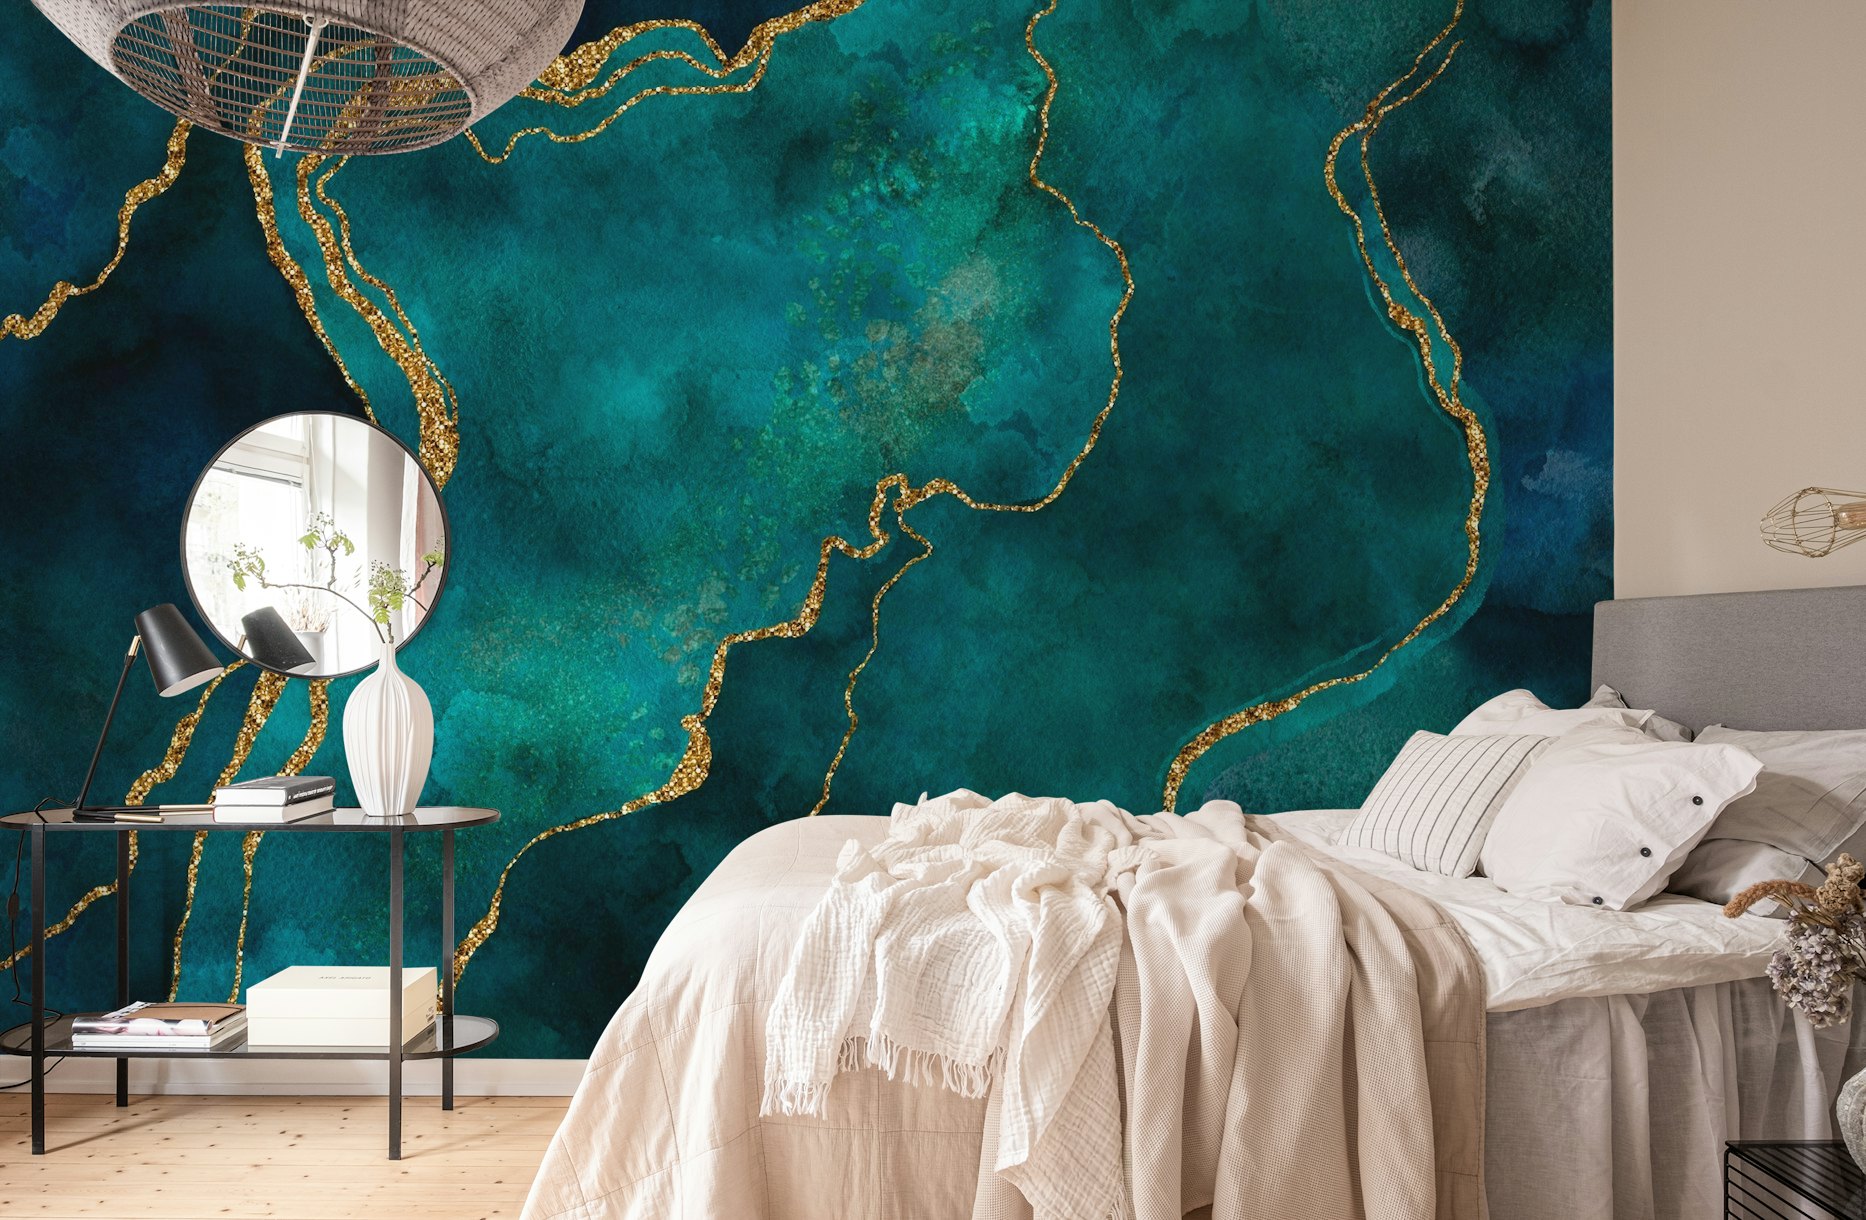 Luxurious Teal and Gold Gemstone Wallpaper Design